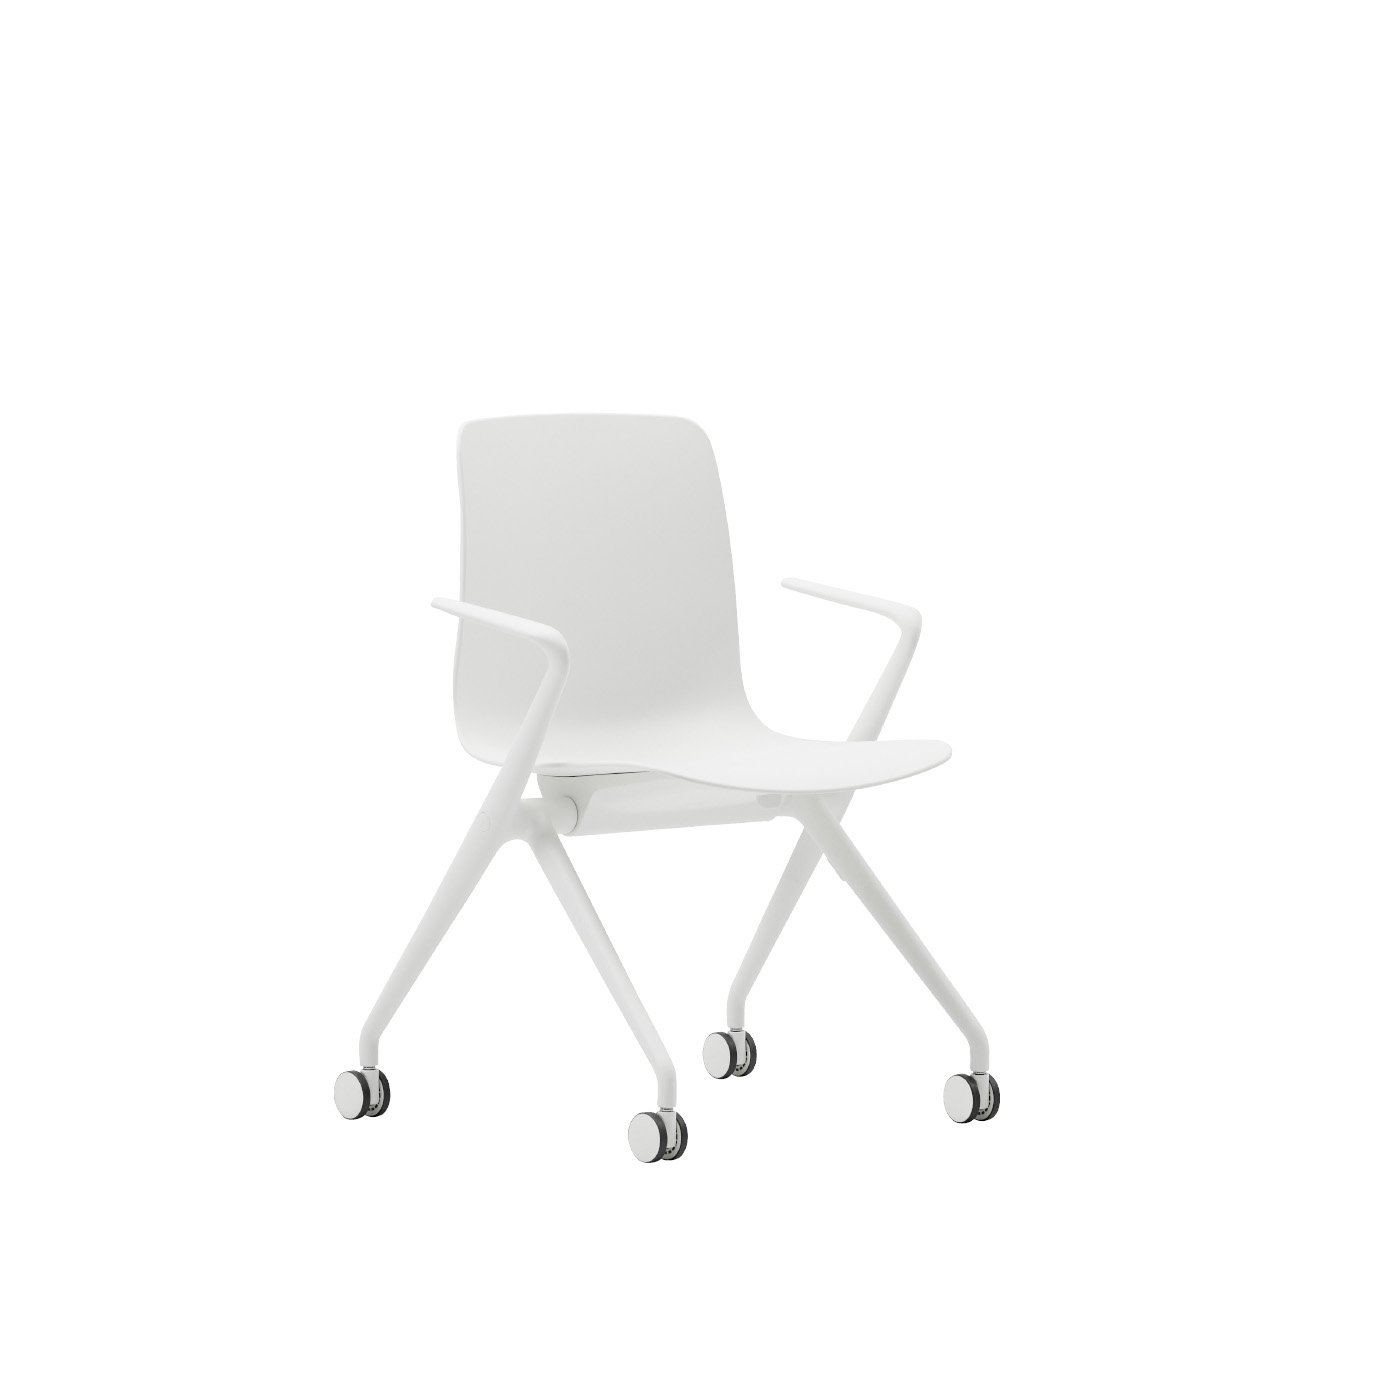 Haworth Bowi conference chair white at an angle